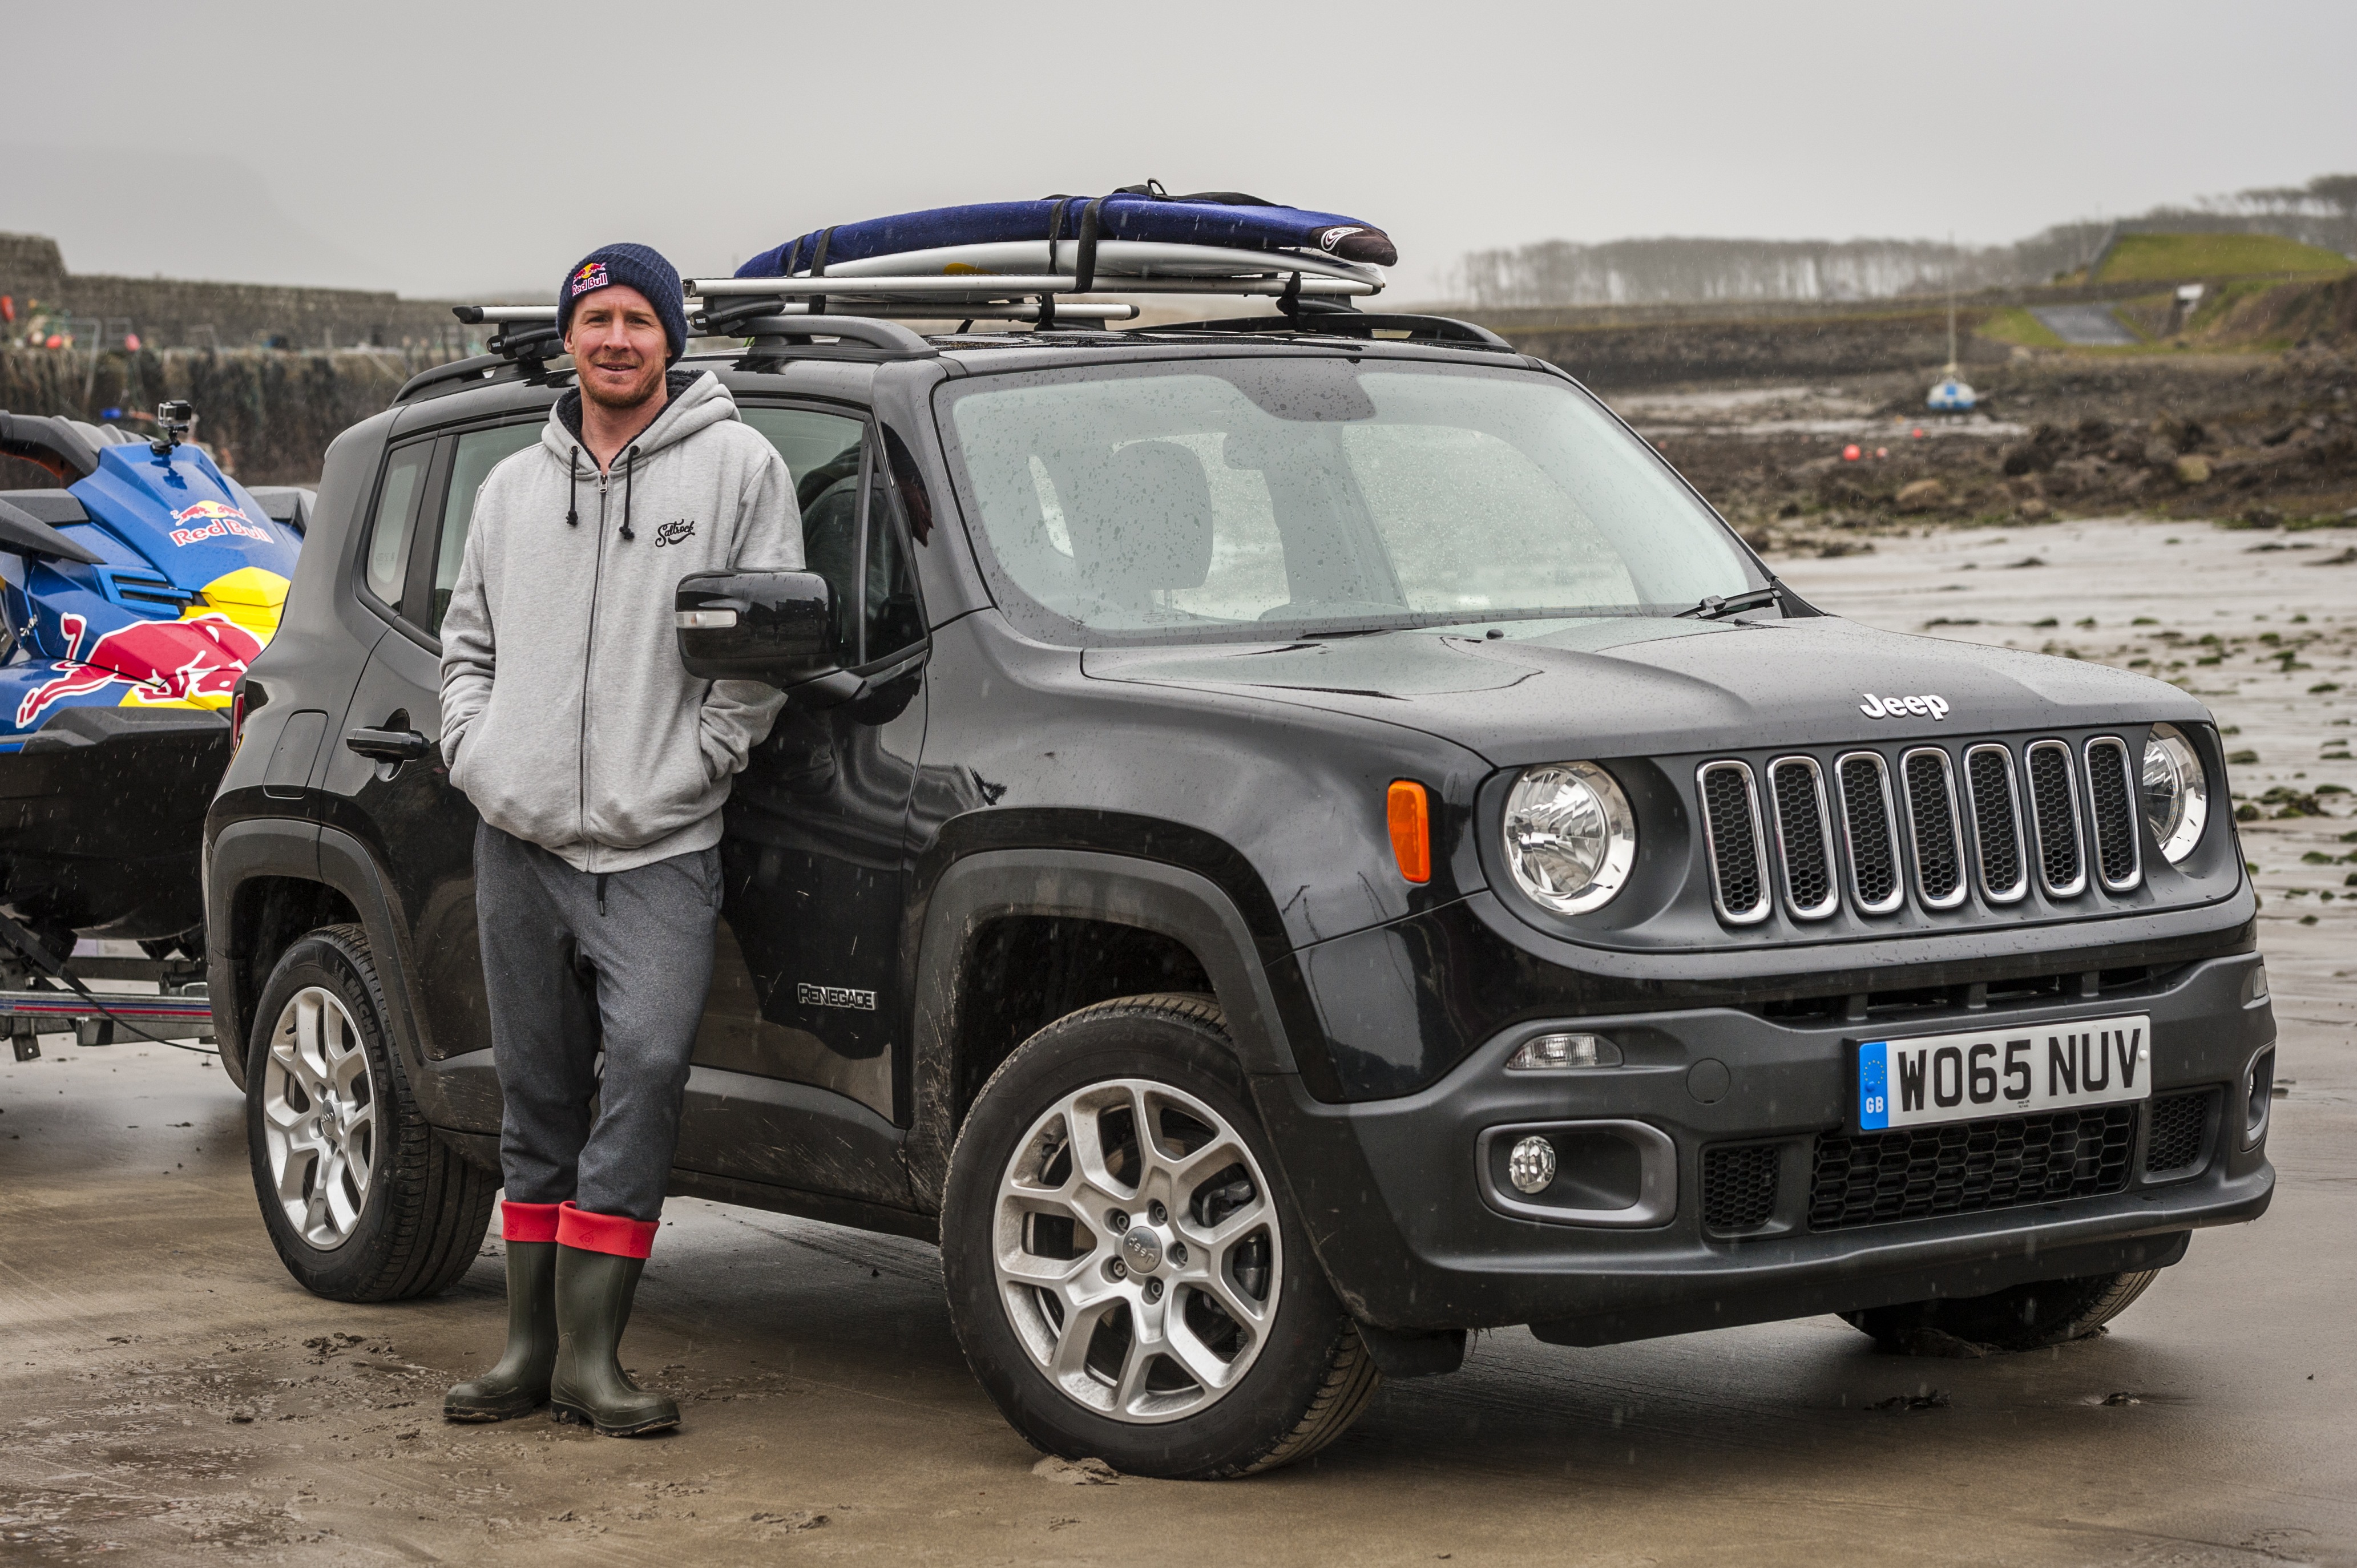 Surfer Andrew Cotton becomes an ambassador for Jeep